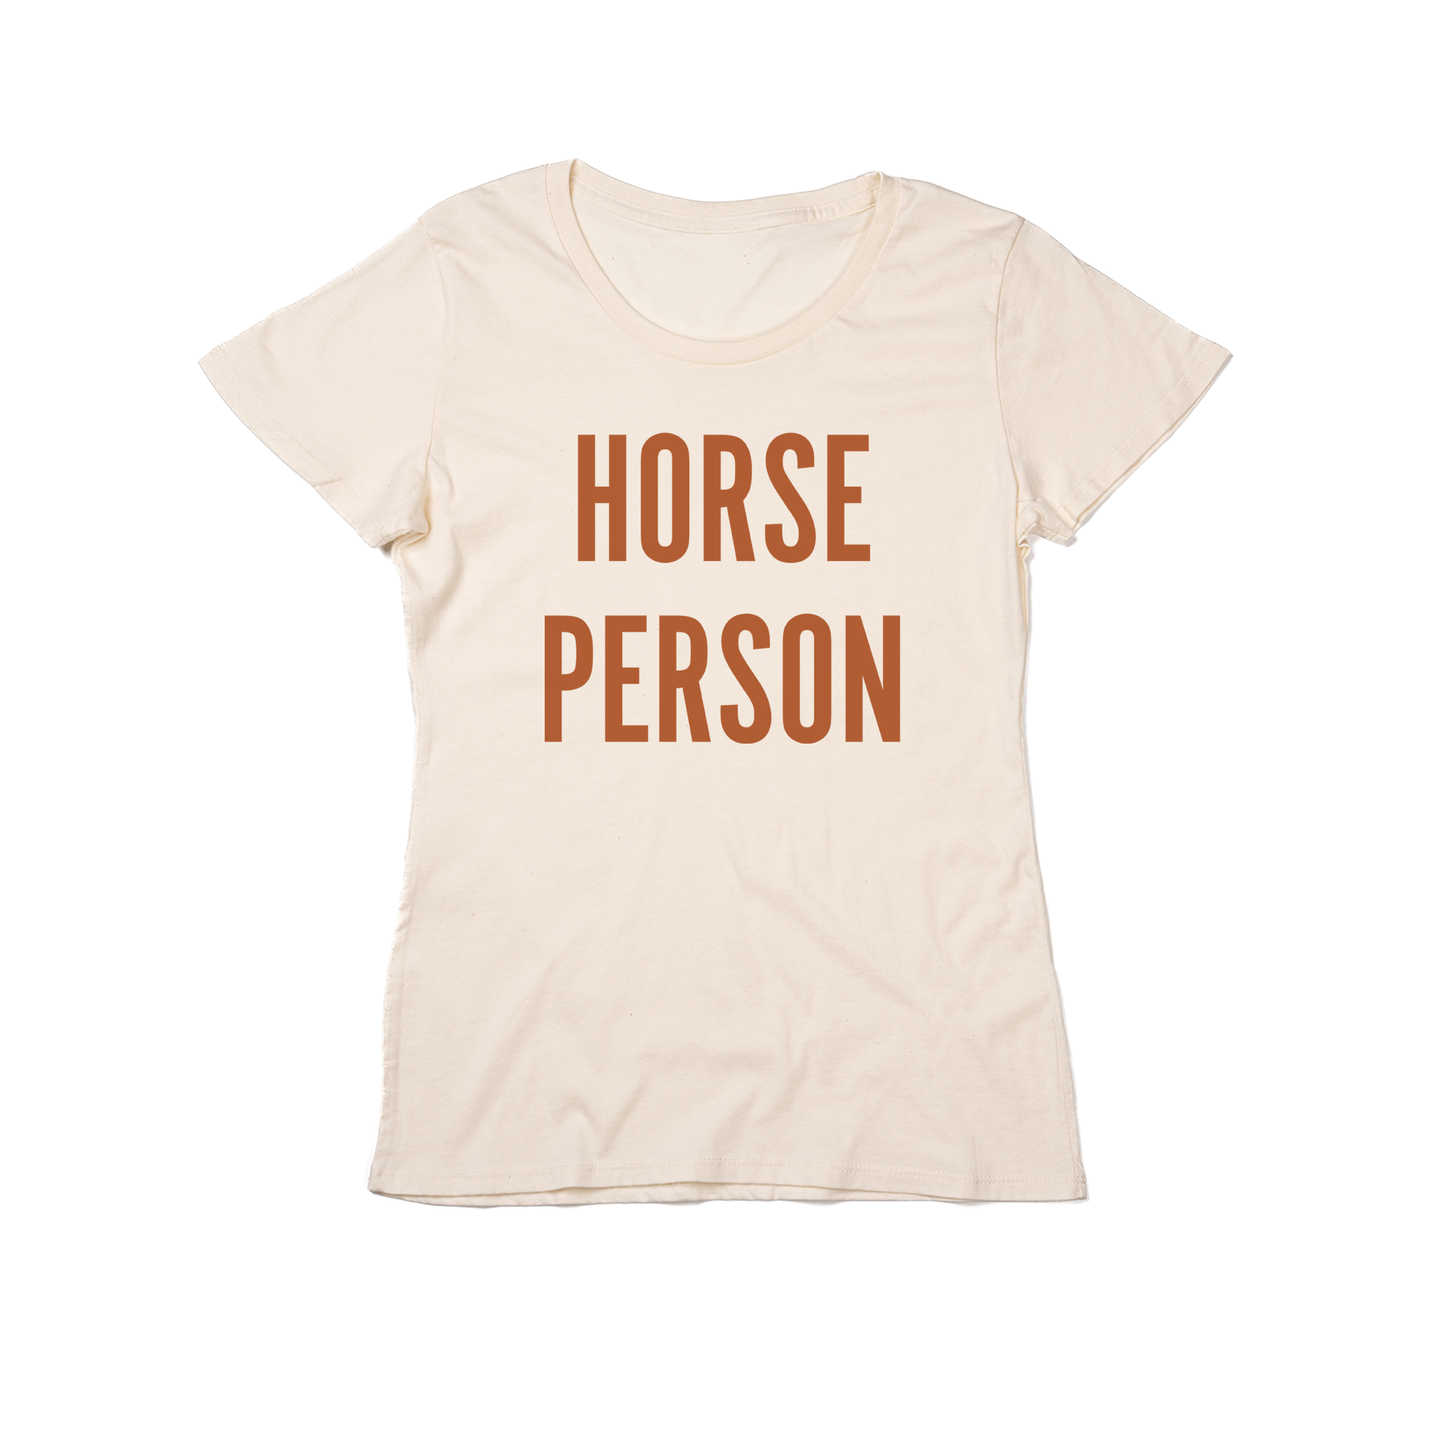 Horse Person (Rust) - Women's Fitted Tee (Natural)